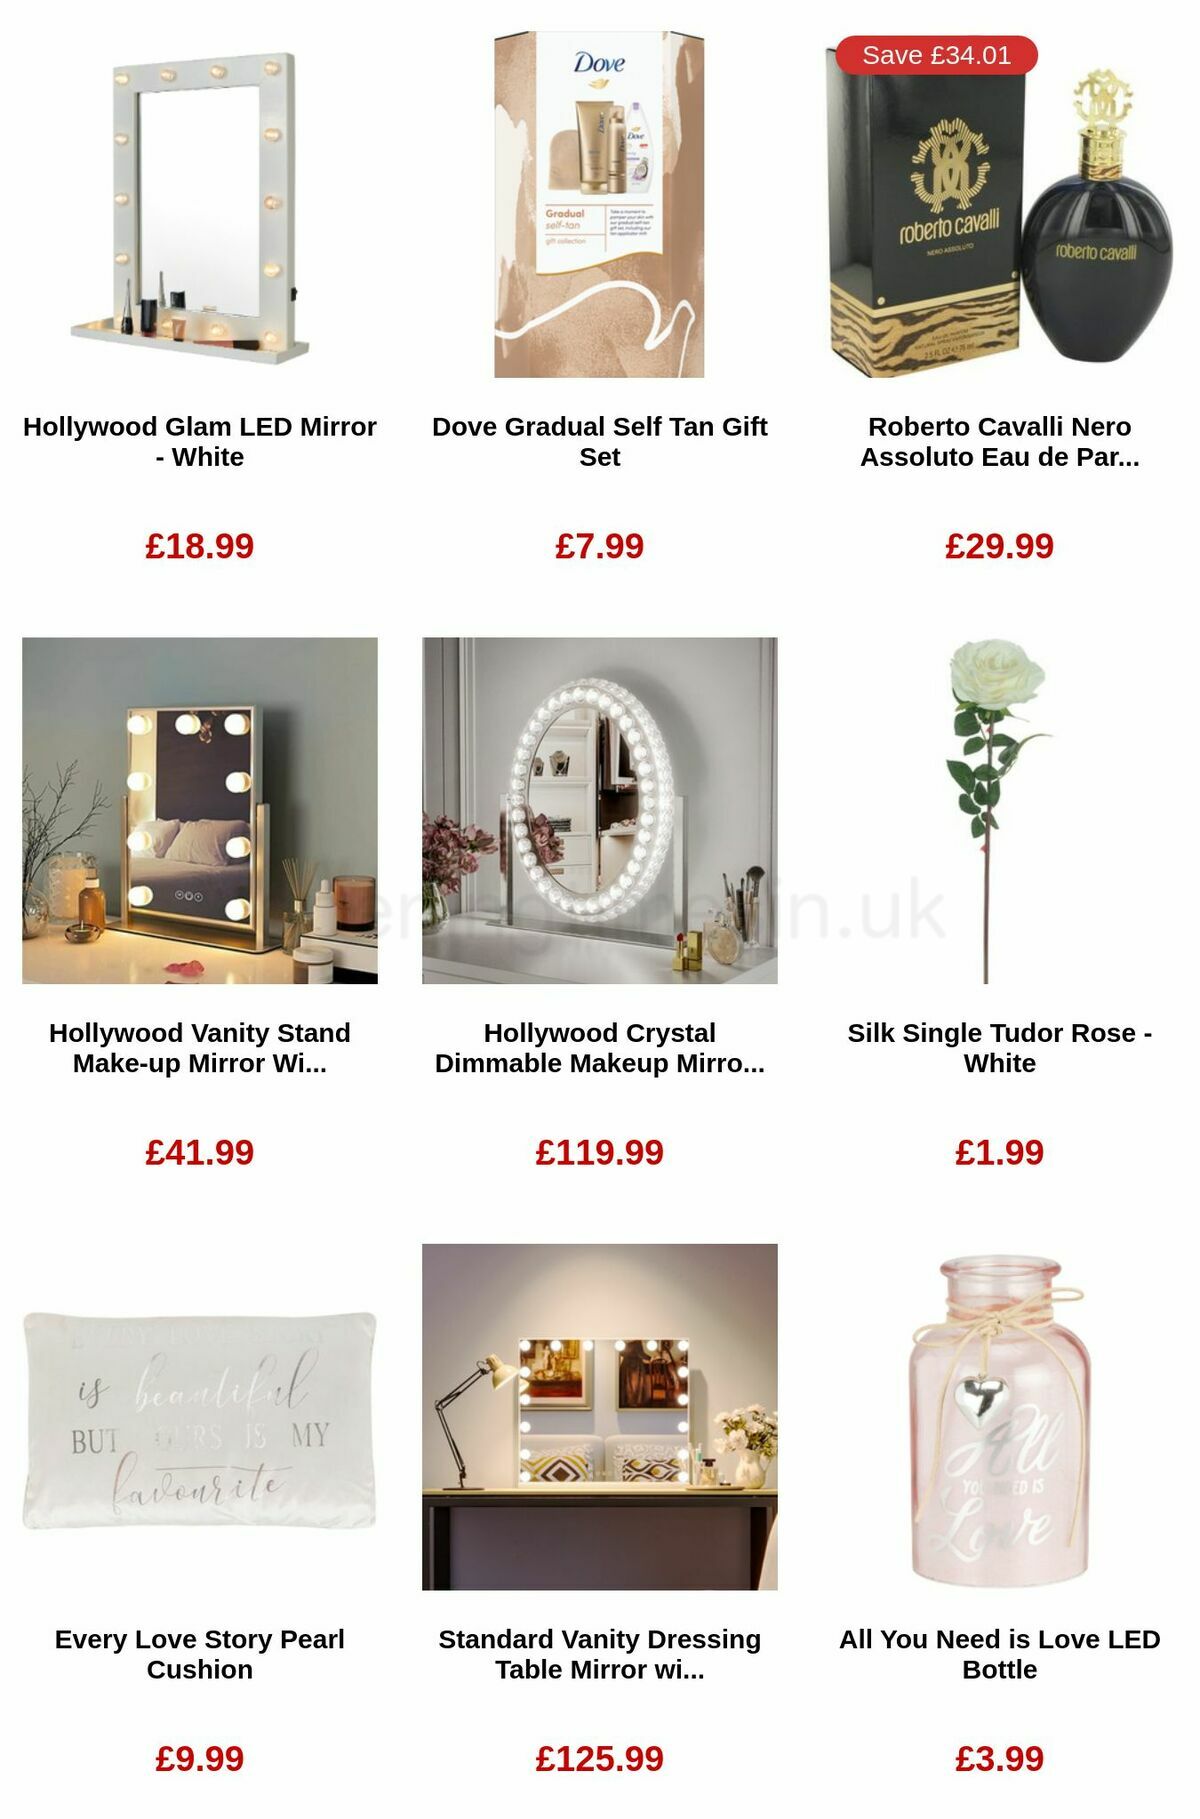 The Range Valentine's Day Offers from 17 January